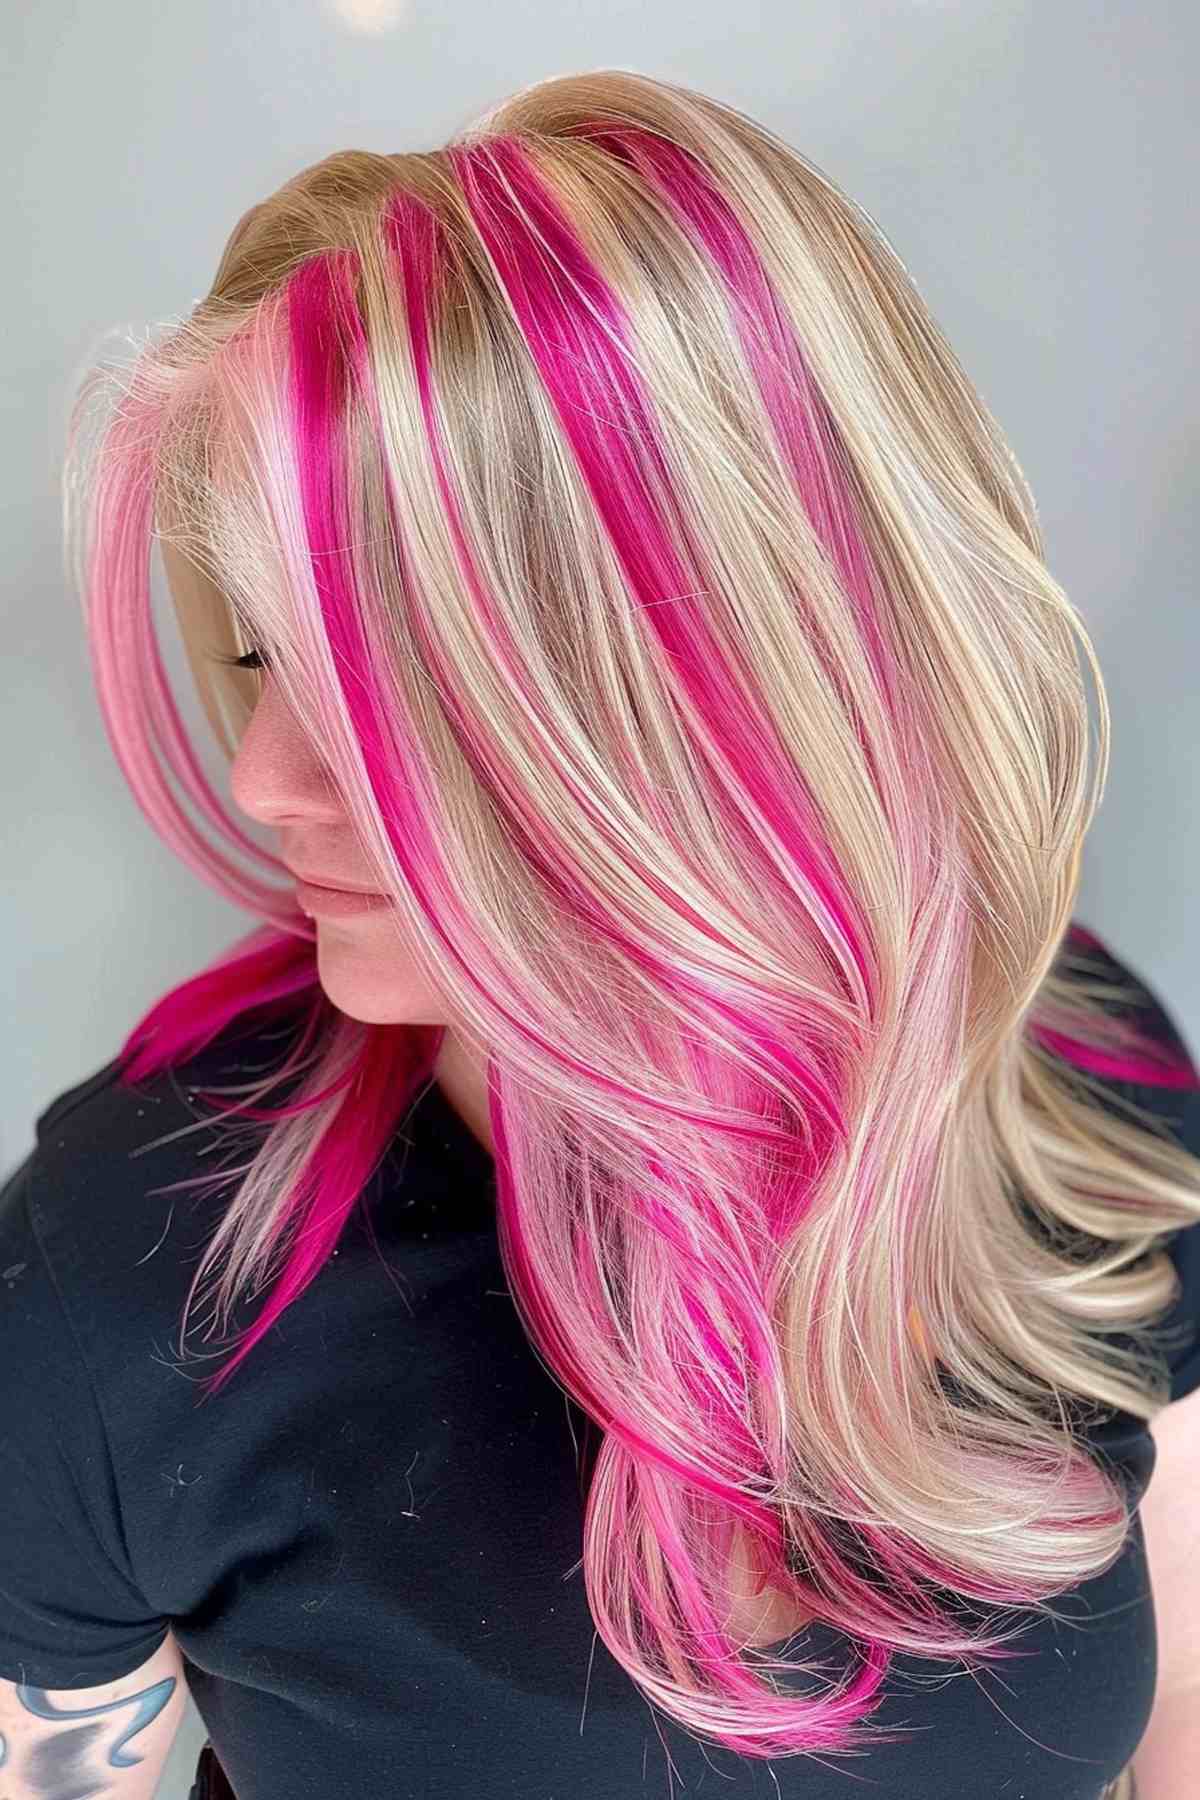 Long blonde hair with chunky pink highlights and layers